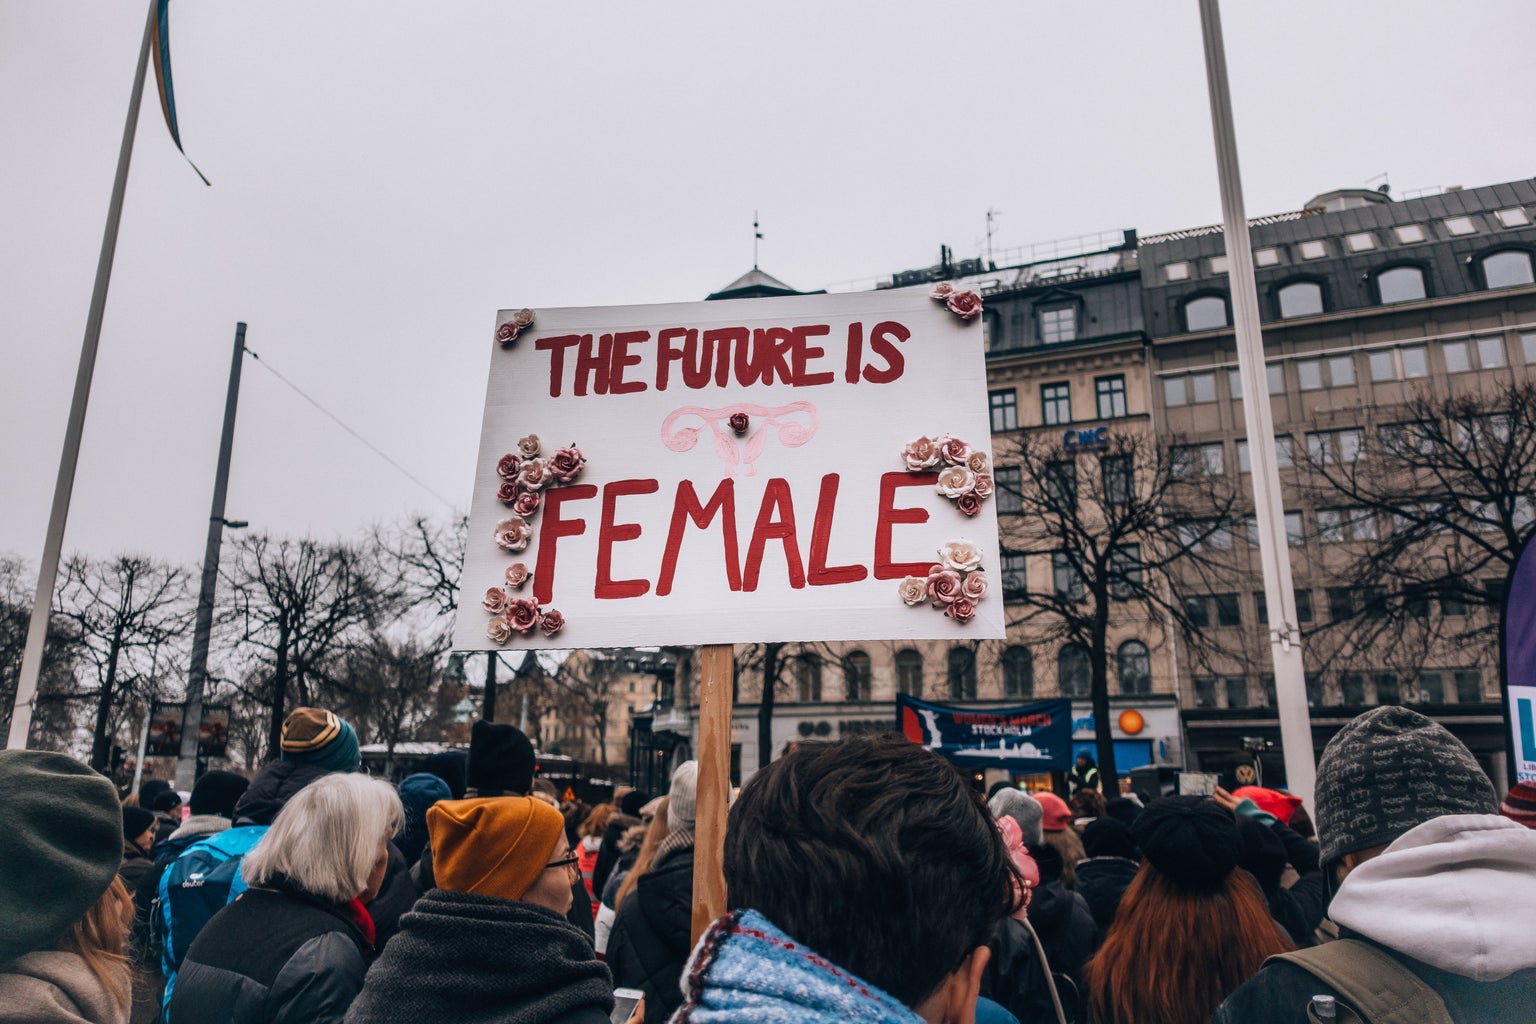 the "future is female" sign